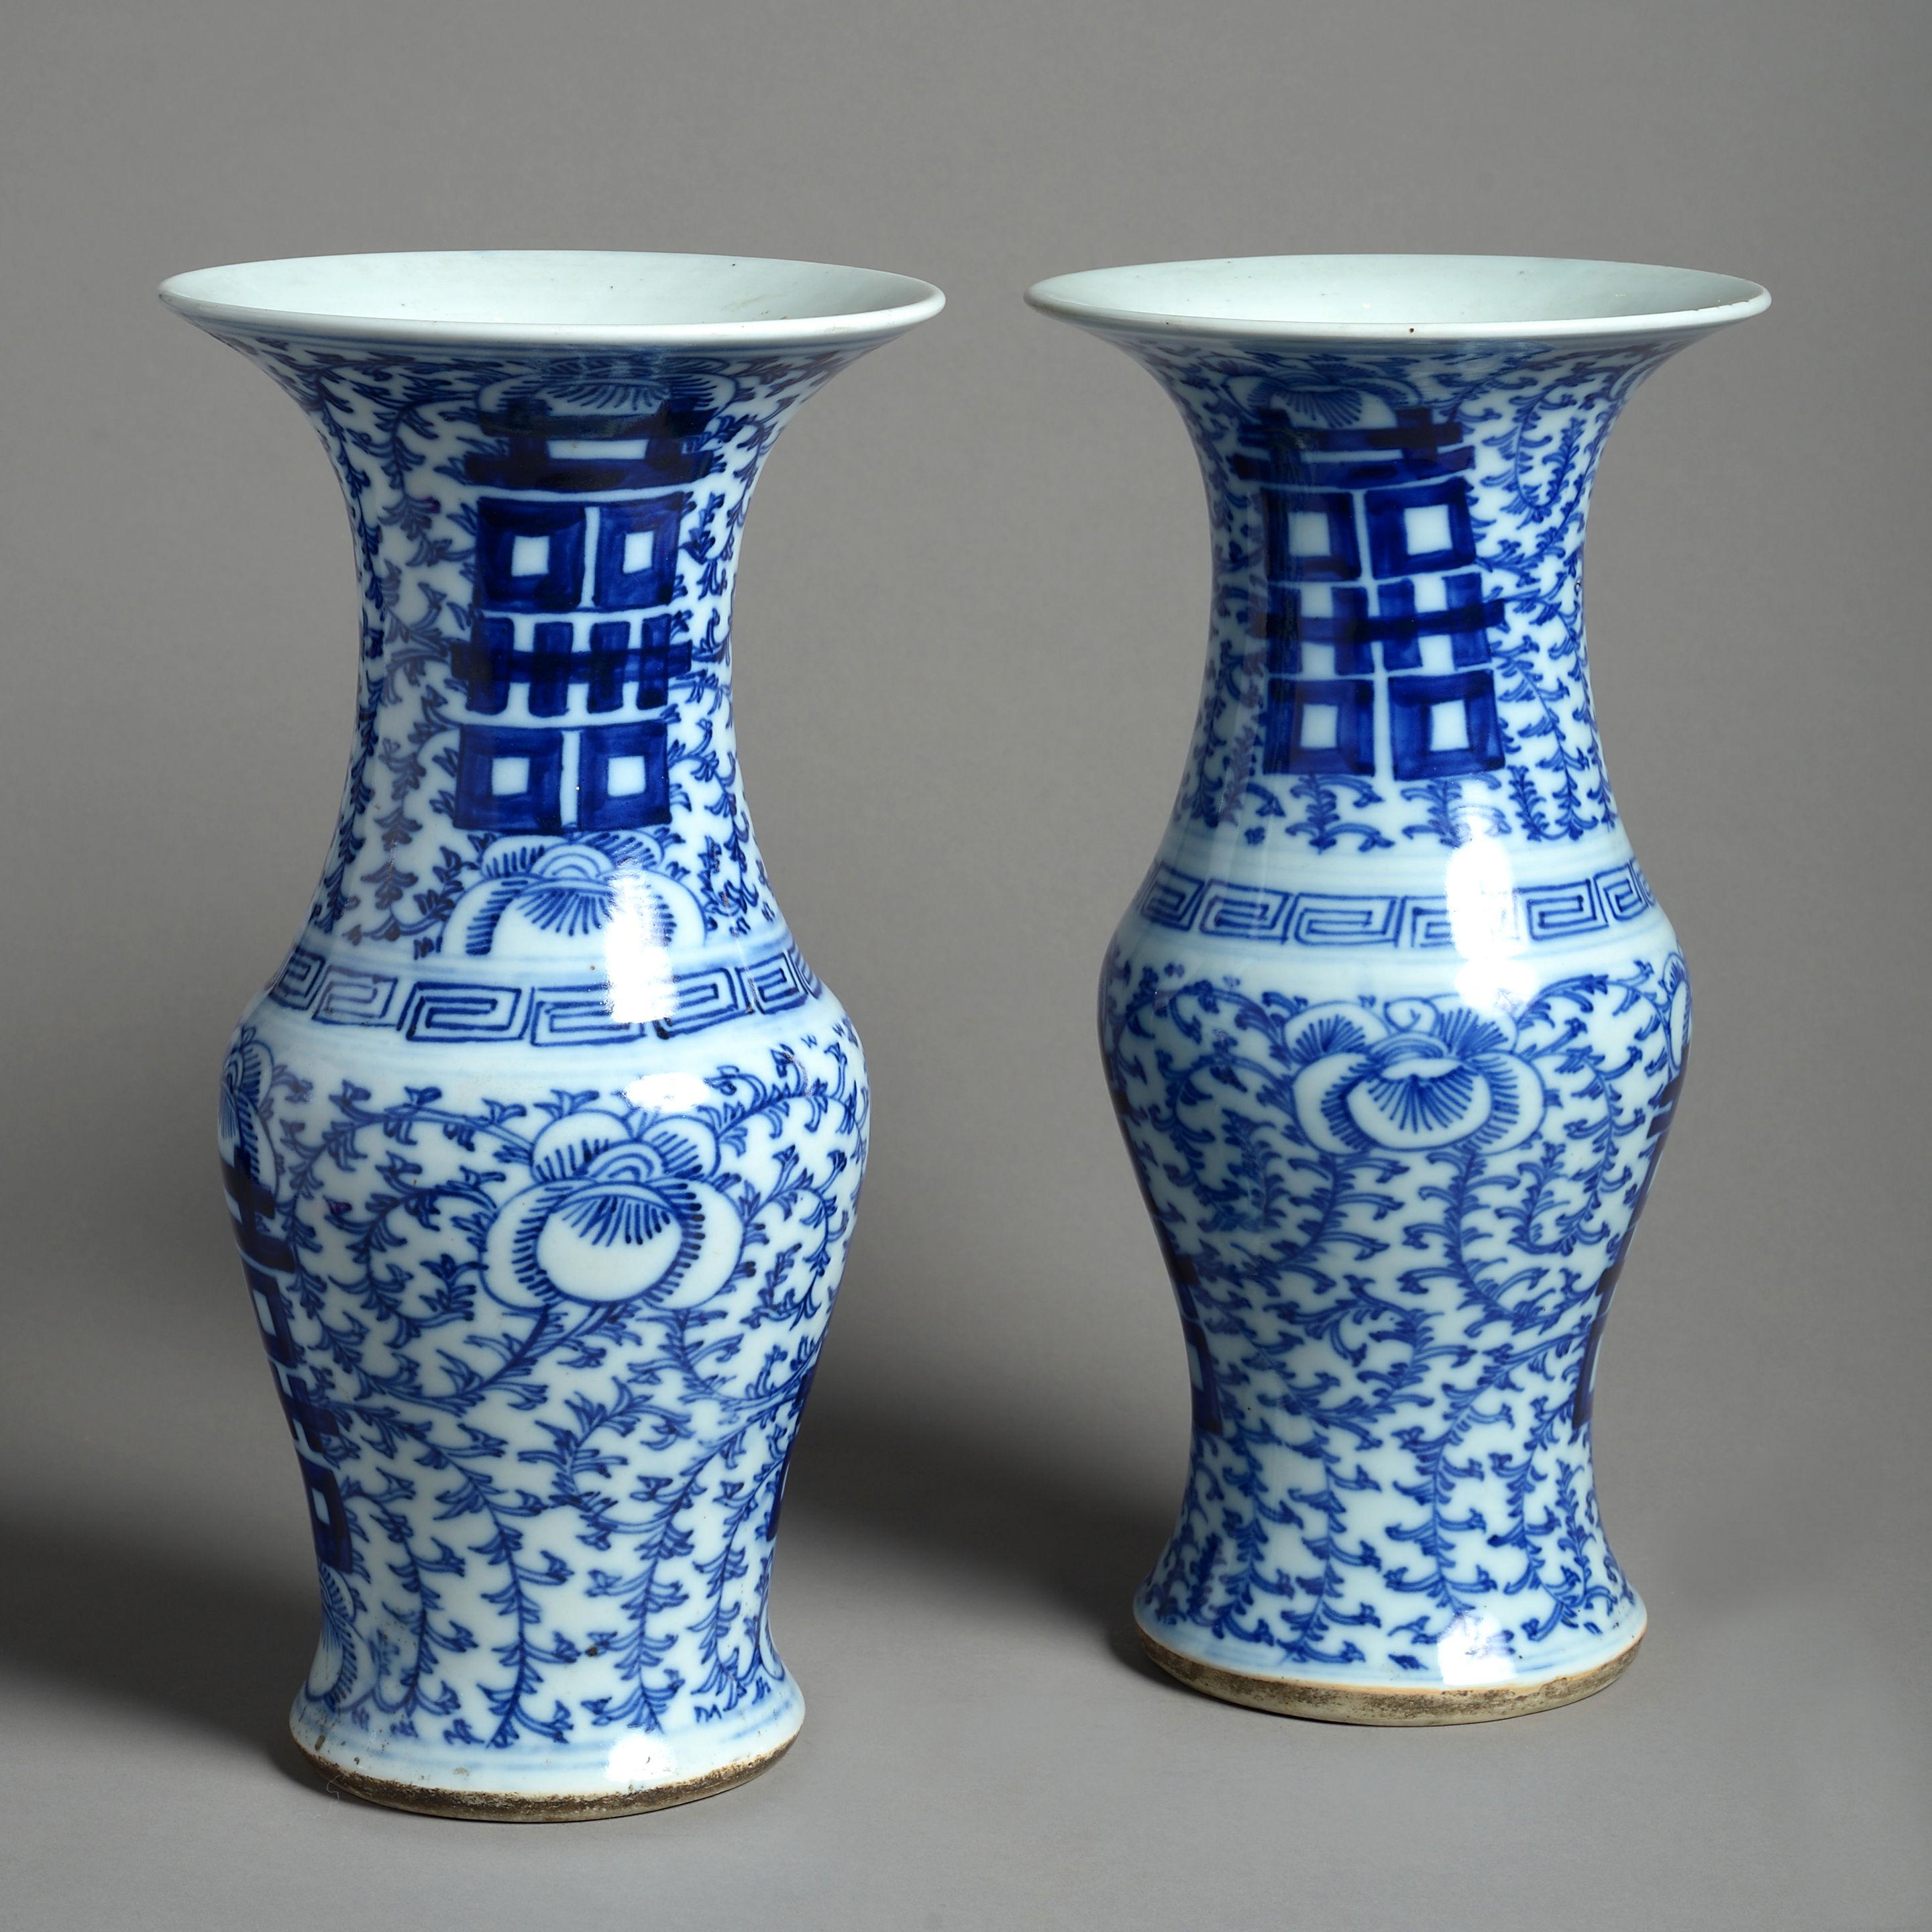 A fine pair of blue and white porcelain vases of trumpet form, the bodies decorated with stylized foliage, Greek key and family marks.
 